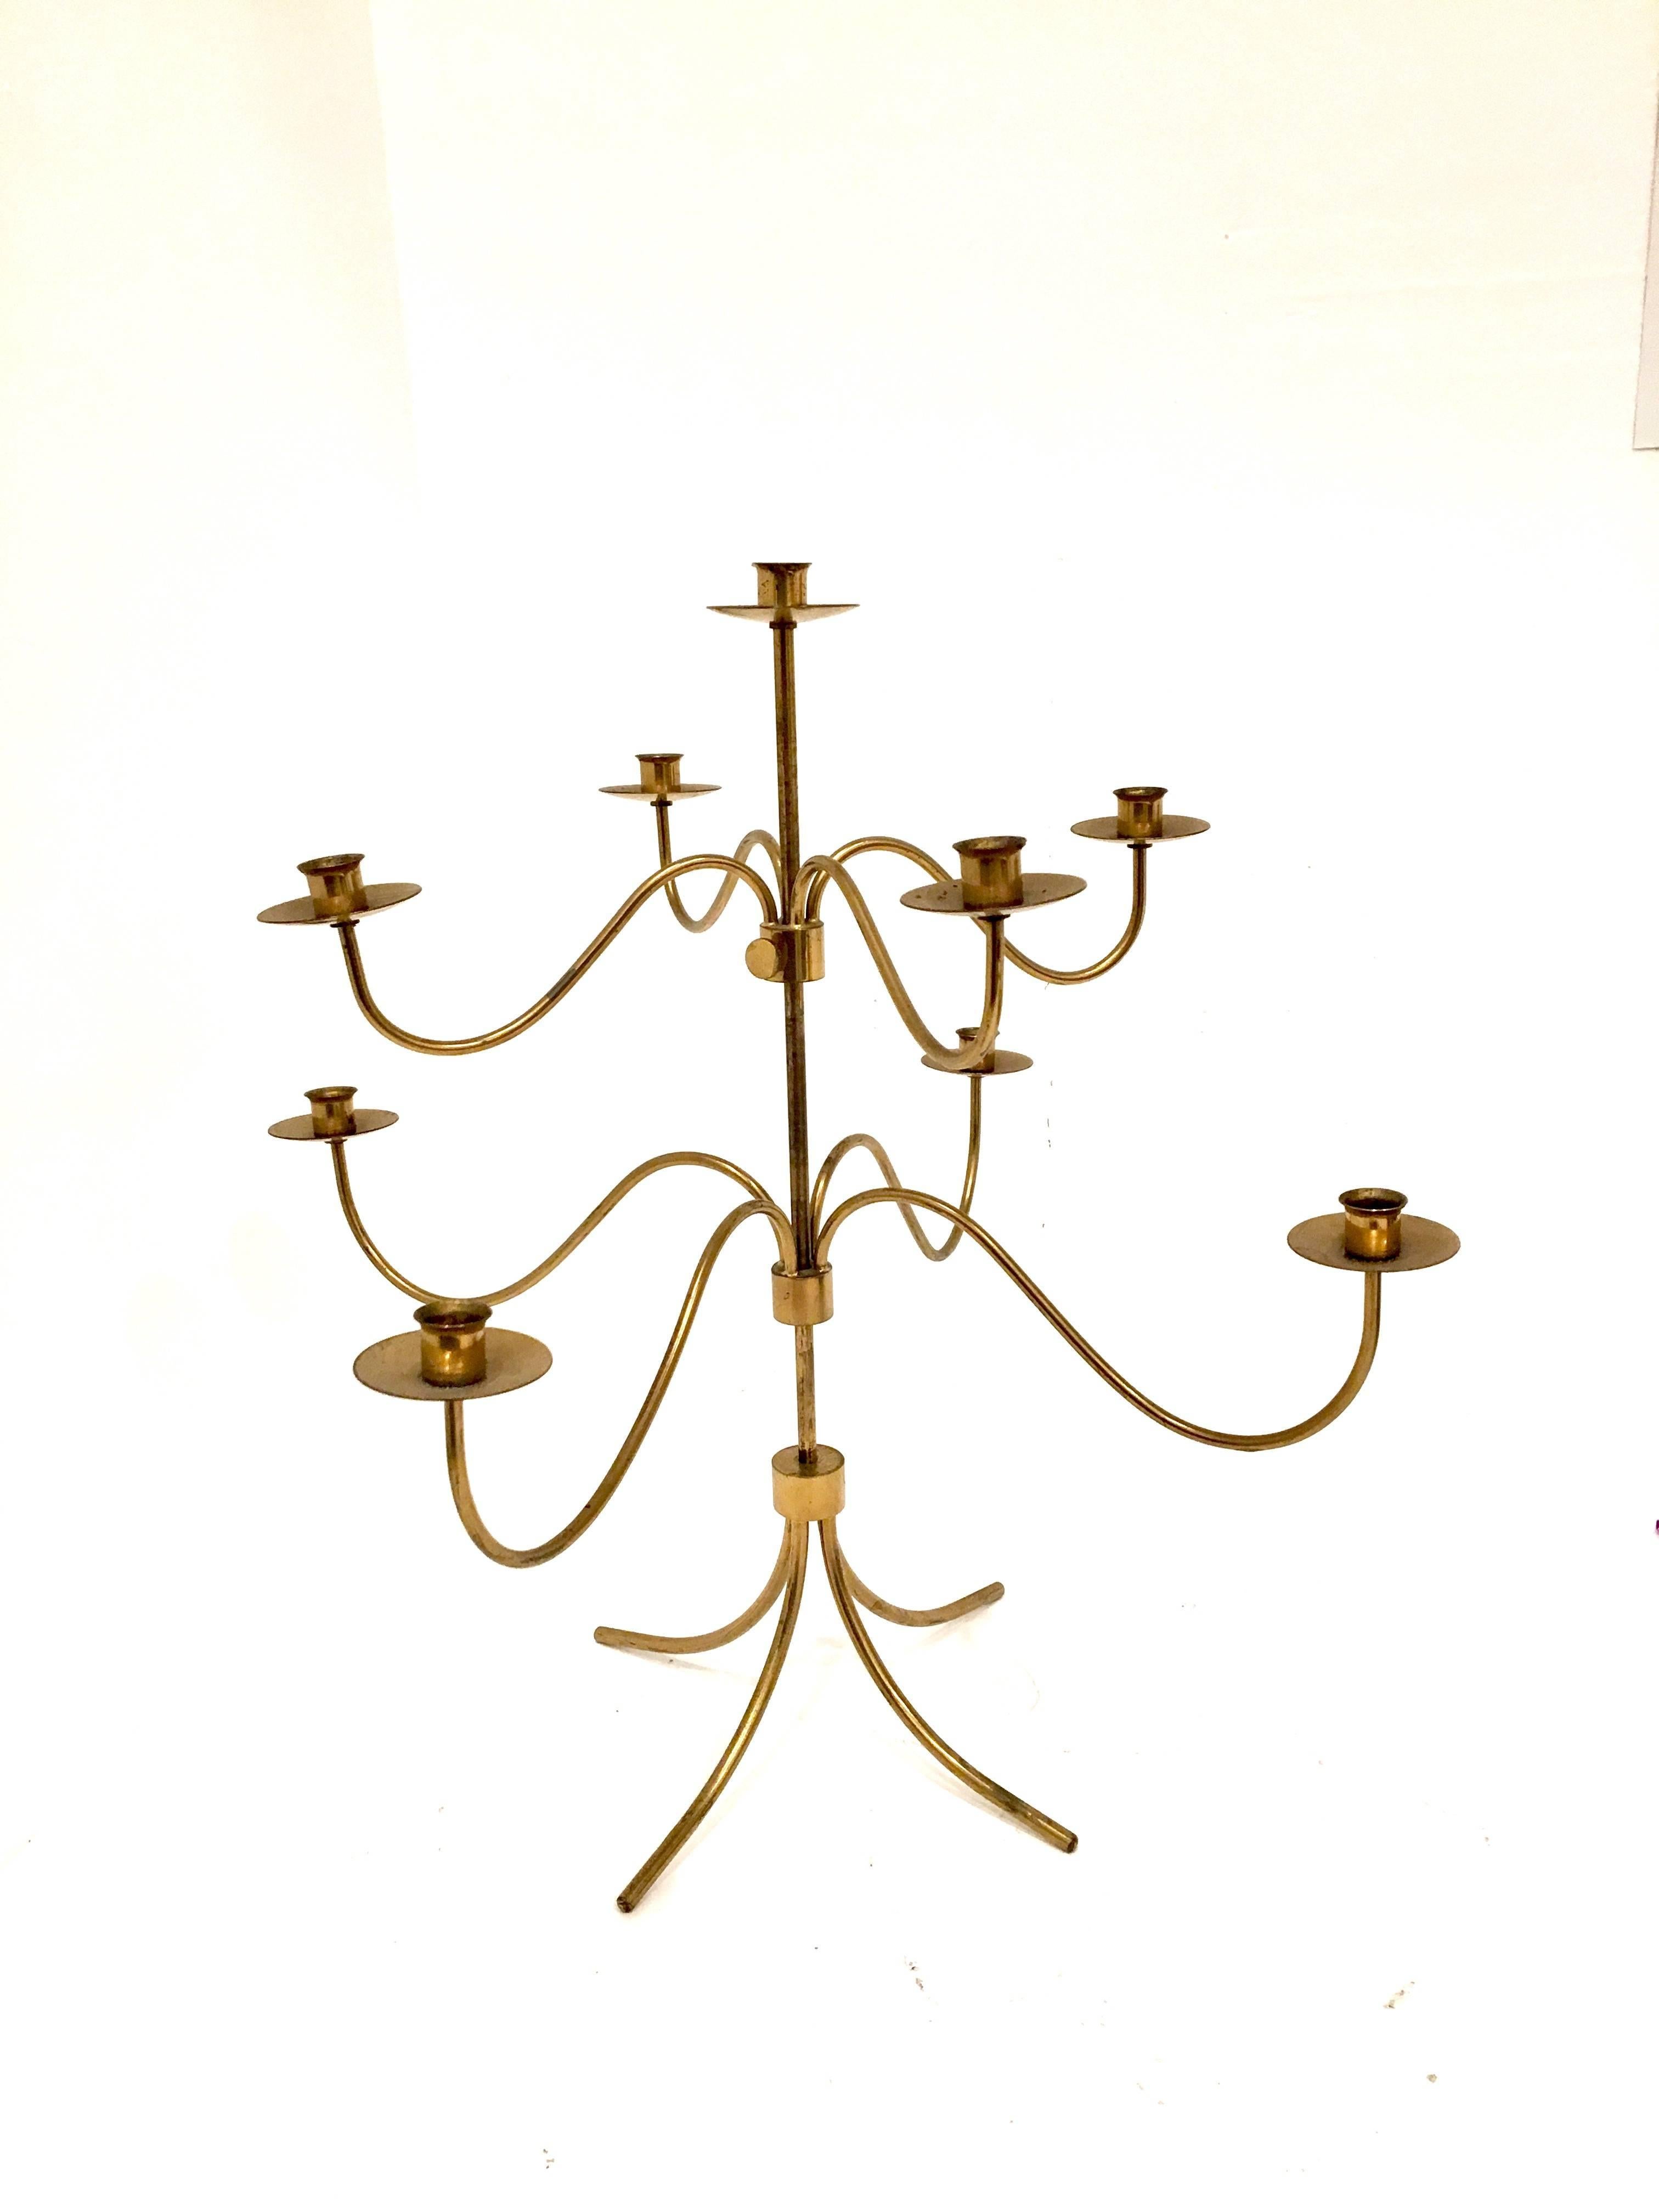 Danish Modern brass candelabra, by Hans Bergstrom, Sweden, circa 1950s. made in Sweden with adjustable arms that move up and down.